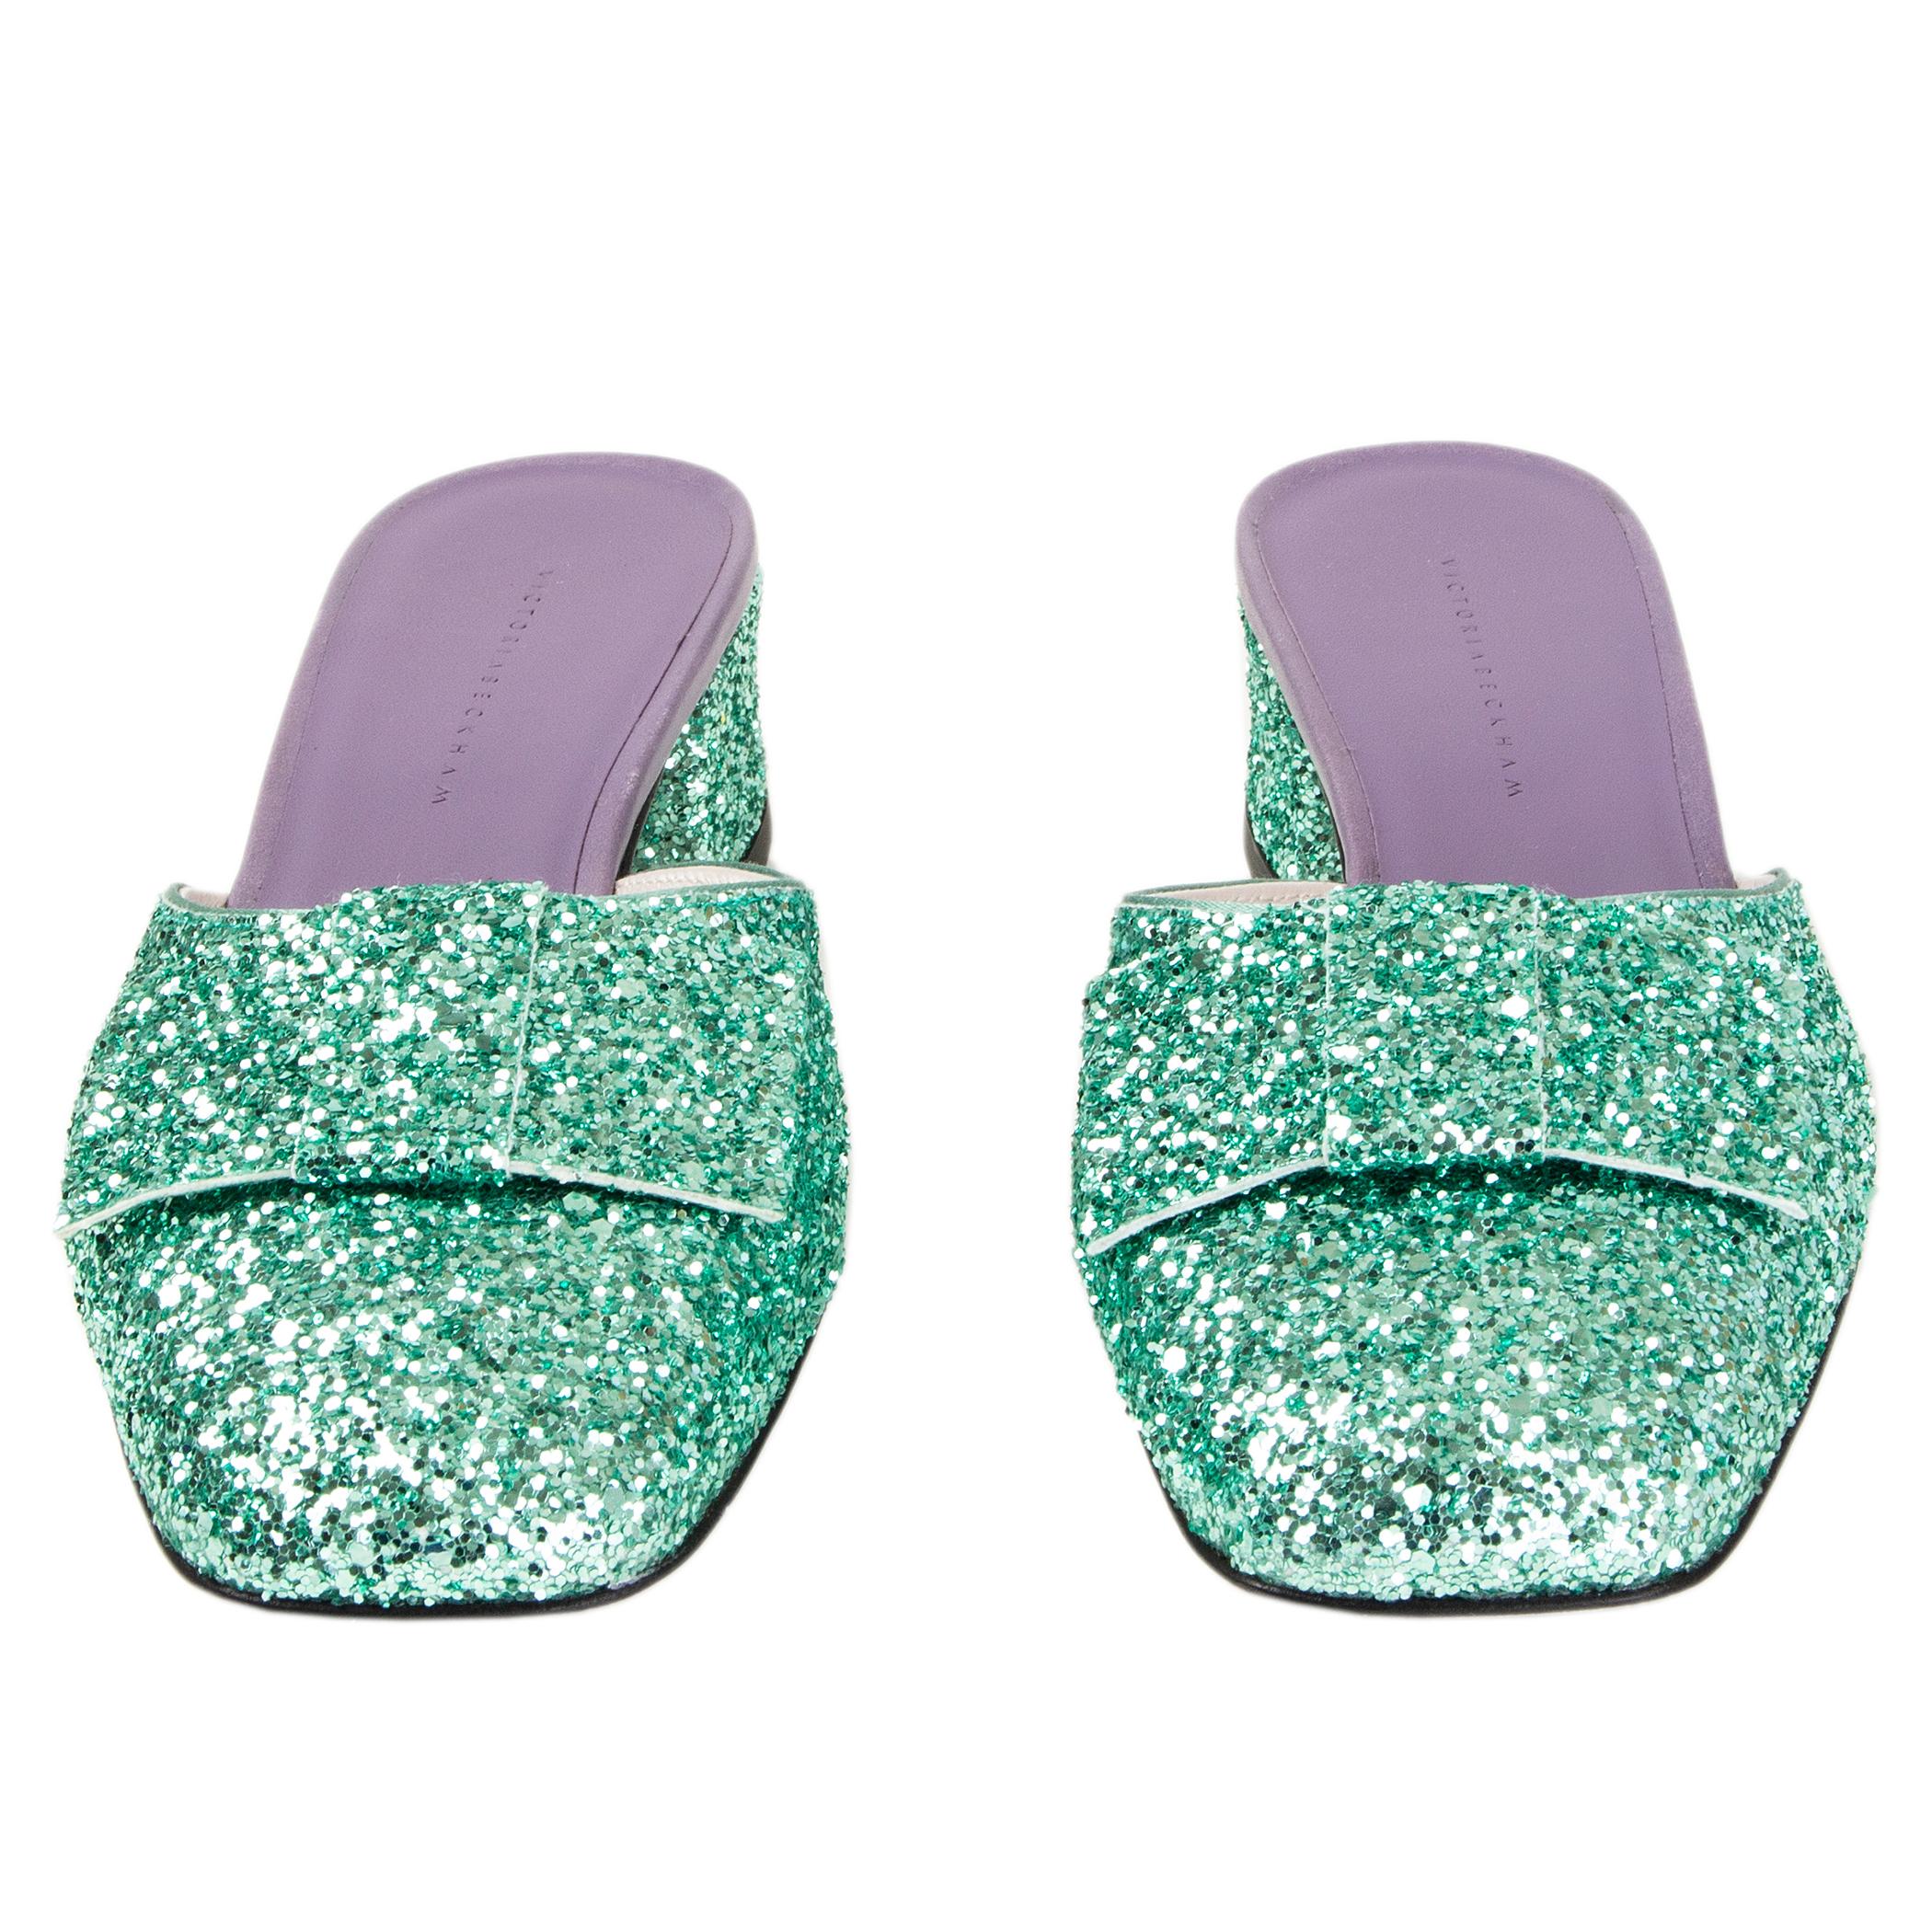 100% authentic Victoria Beckham 'Harper' mules in turquoise glitter and  lilac leather. Brand new. Come with dust bag.

Measurements
Imprinted Size	39.5
Shoe Size	39.5
Inside Sole	25.5cm (9.9in)
Width	8cm (3.1in)
Heel	4.5cm (1.8in)

All our listings